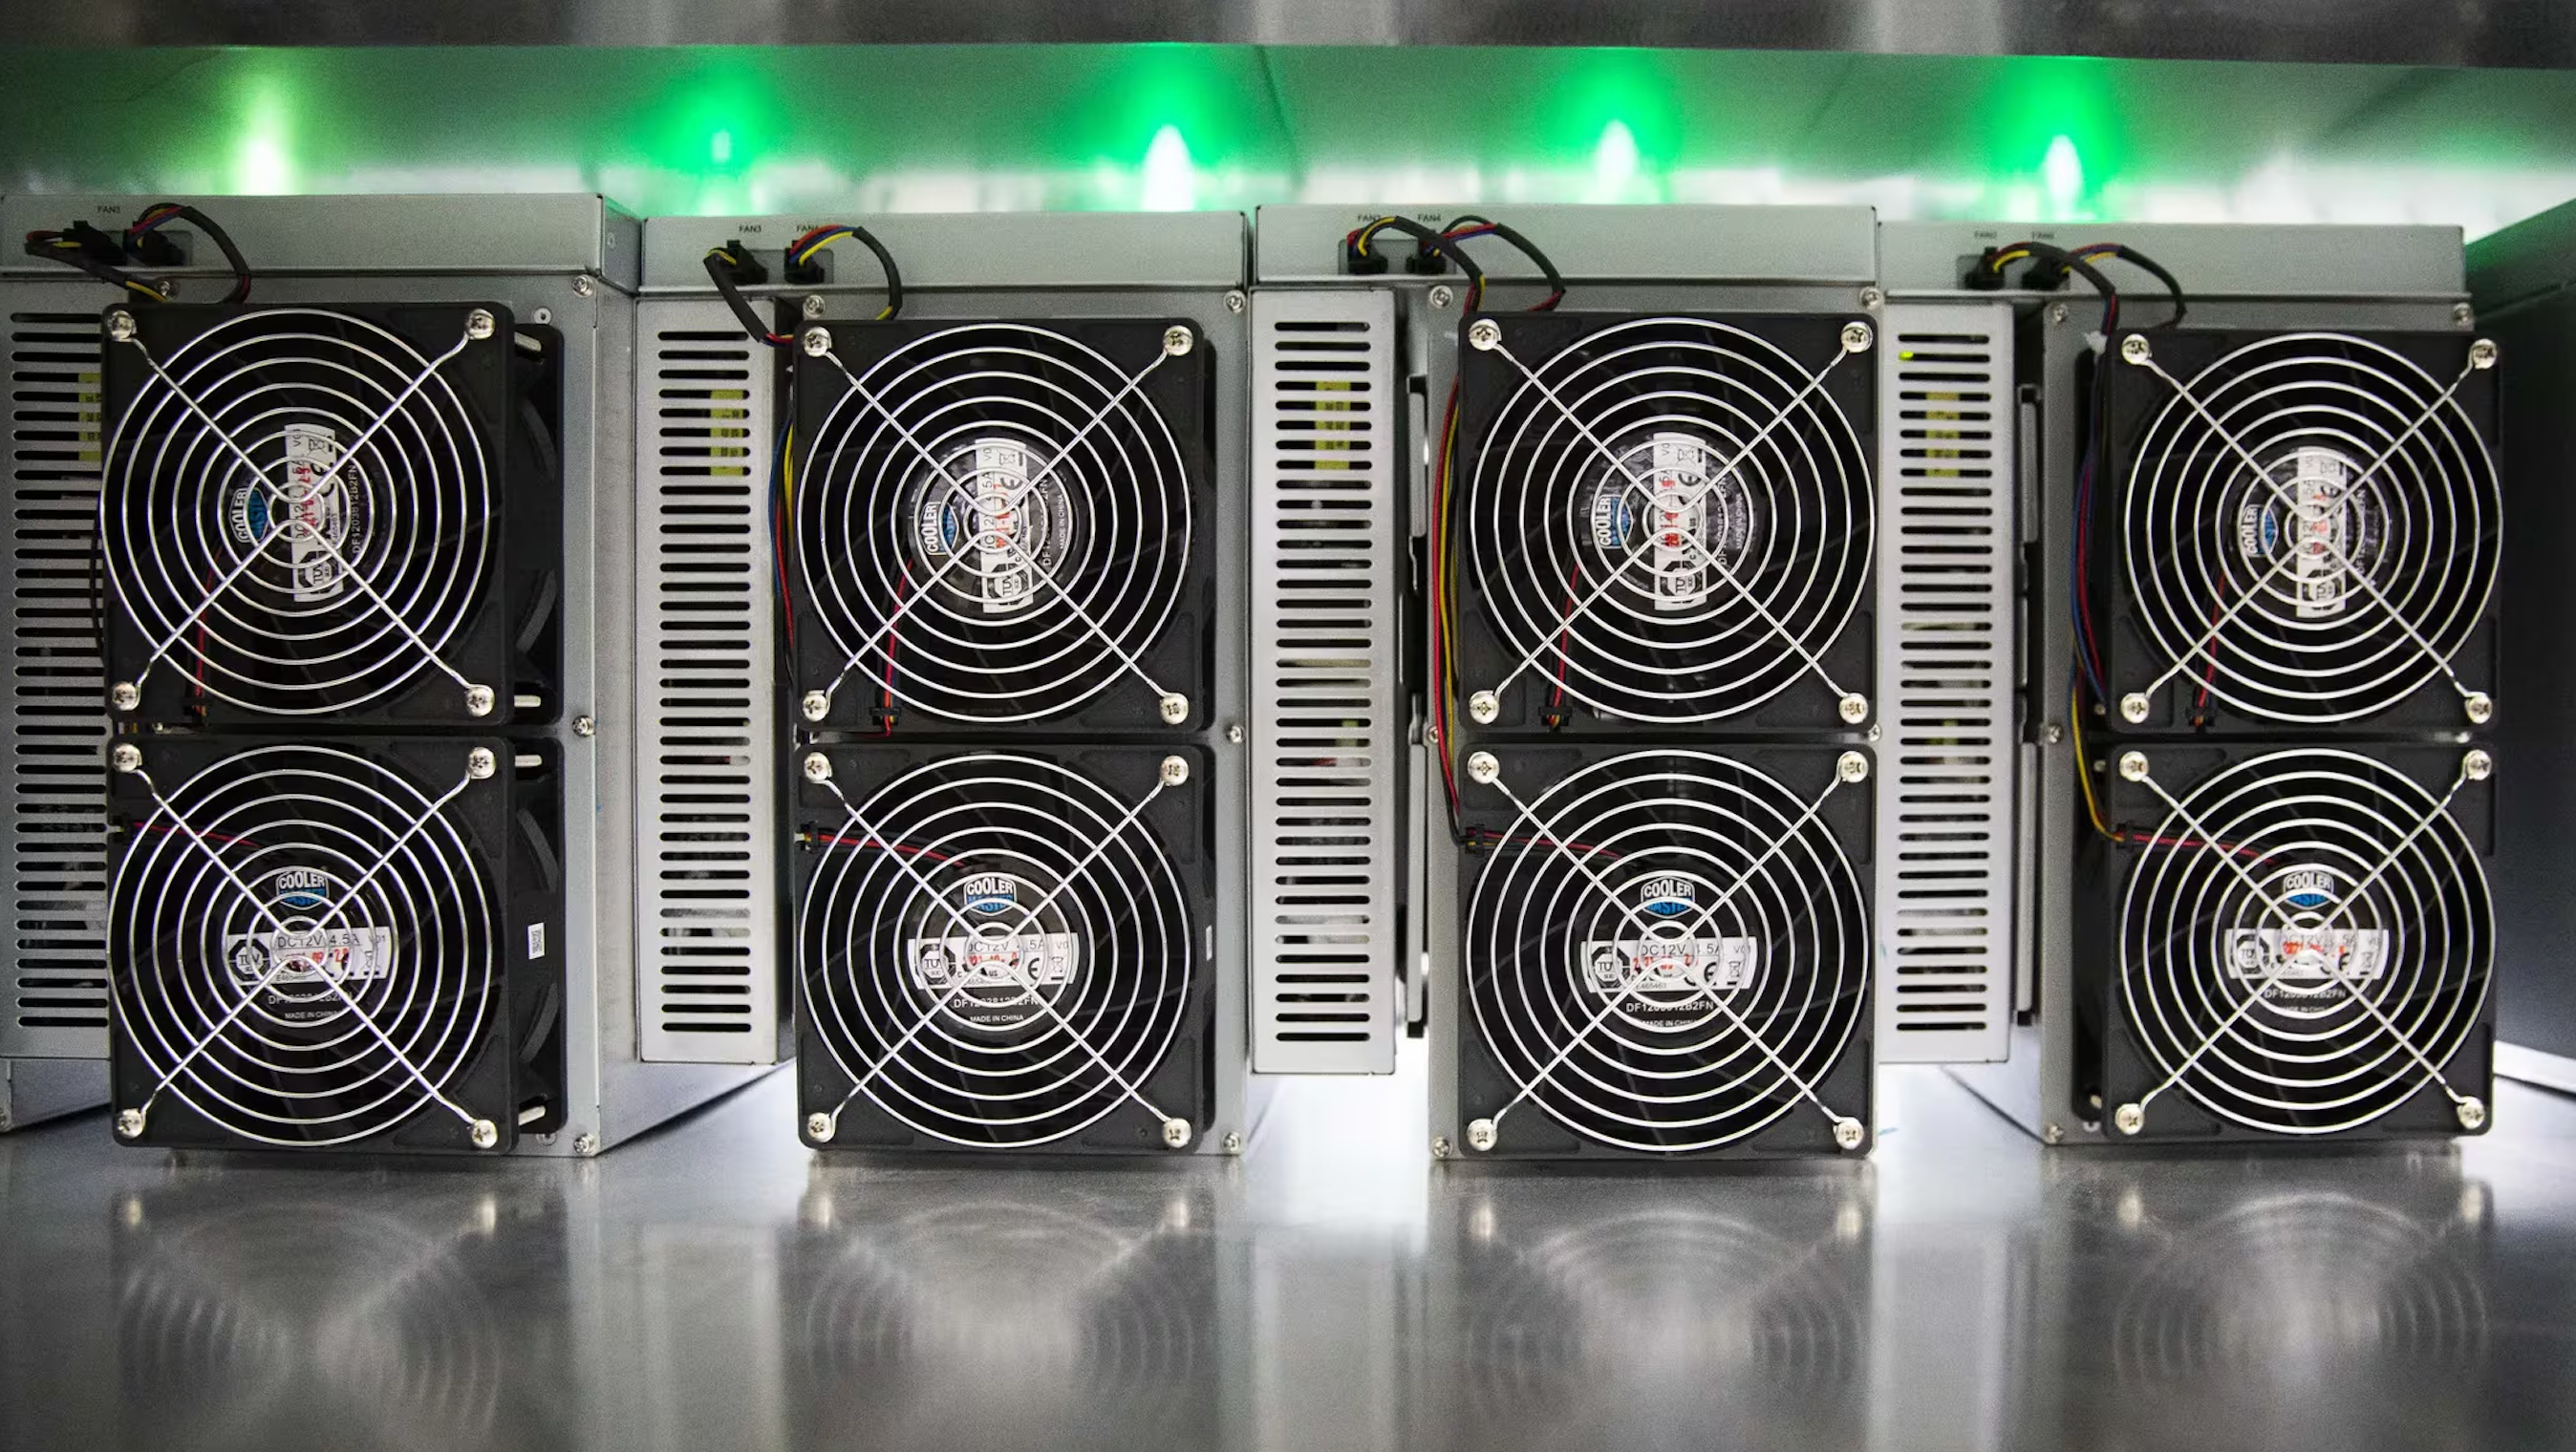 Bitcoin Miner Outflows Hit Six-Year Highs Ahead of Halving, Sparking Mixed Signals.